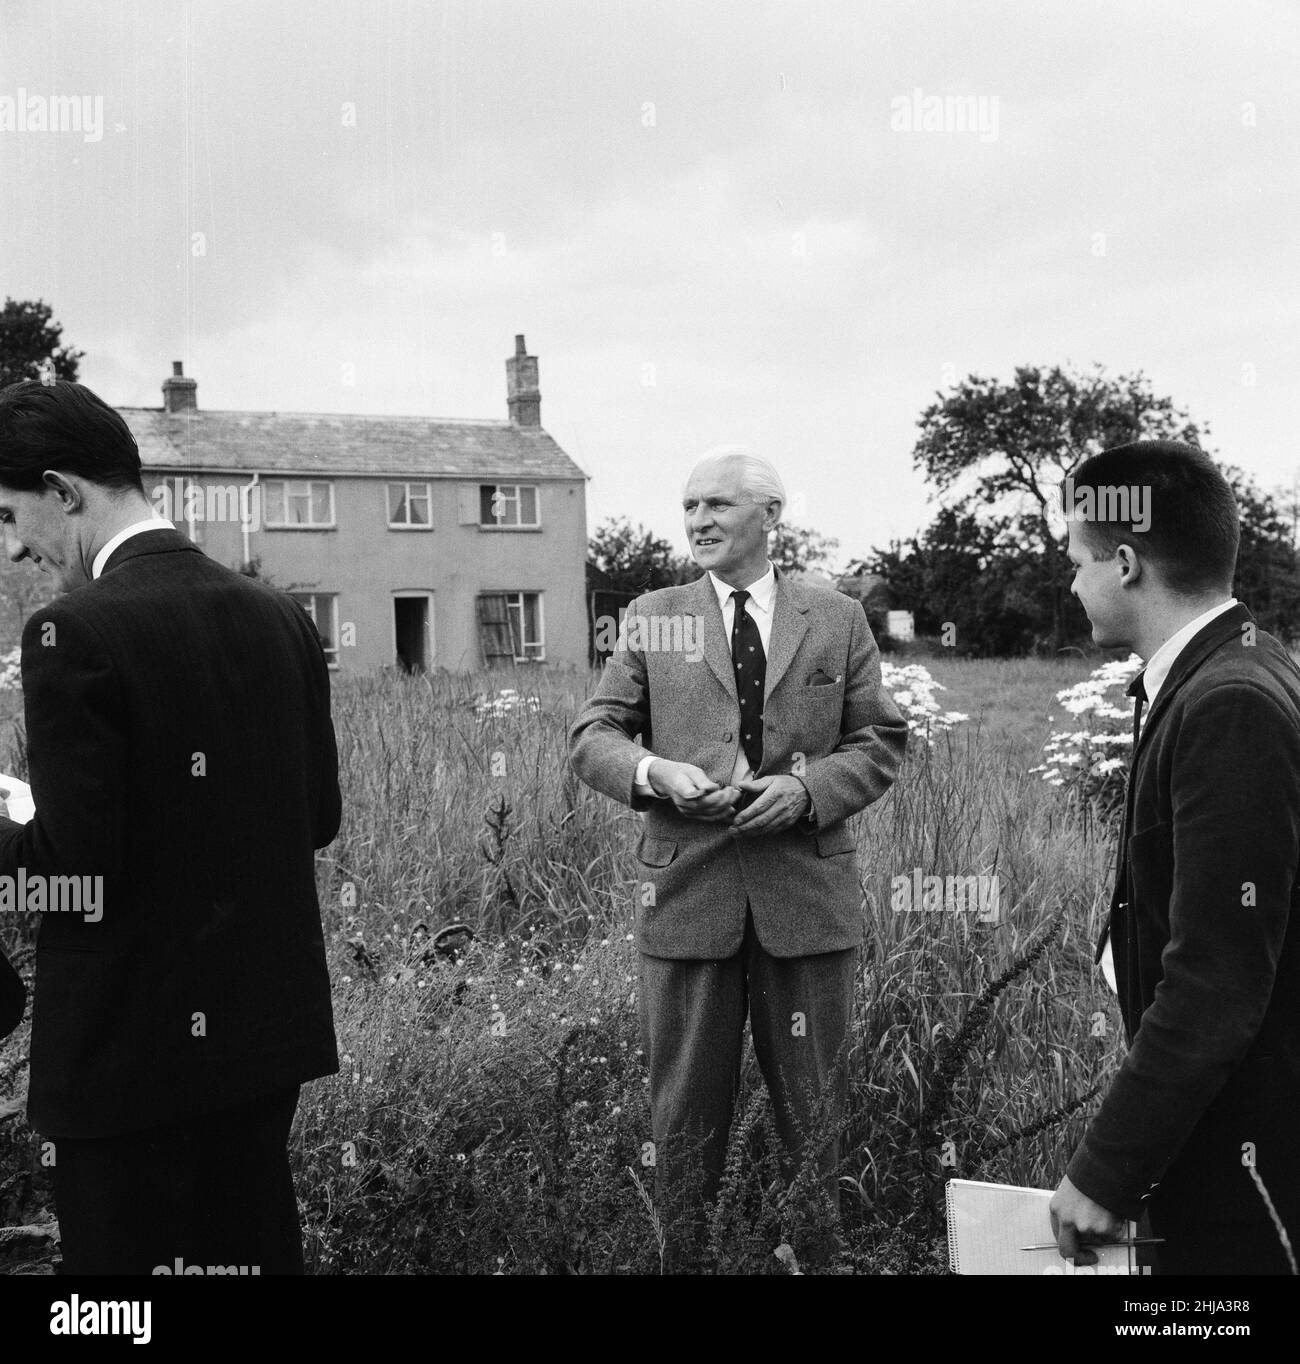 Leatherslade Farm, between Oakley and Brill in Buckinghamshire, hideout used by gang, 27 miles from the crime scene, Tuesday 13th August 1963. Our Picture Shows ... Detective Superintendent Malcolm Fewtrell, Head of Buckinghamshire CID at farmhouse.   The 1963 Great Train Robbery was the robbery of 2.6 million pounds from a Royal Mail train heading from Glasgow to London on the West Coast Main Line in the early hours of 8th August 1963, at Bridego Railway Bridge, Ledburn, near Mentmore in  Buckinghamshire, England. Stock Photo